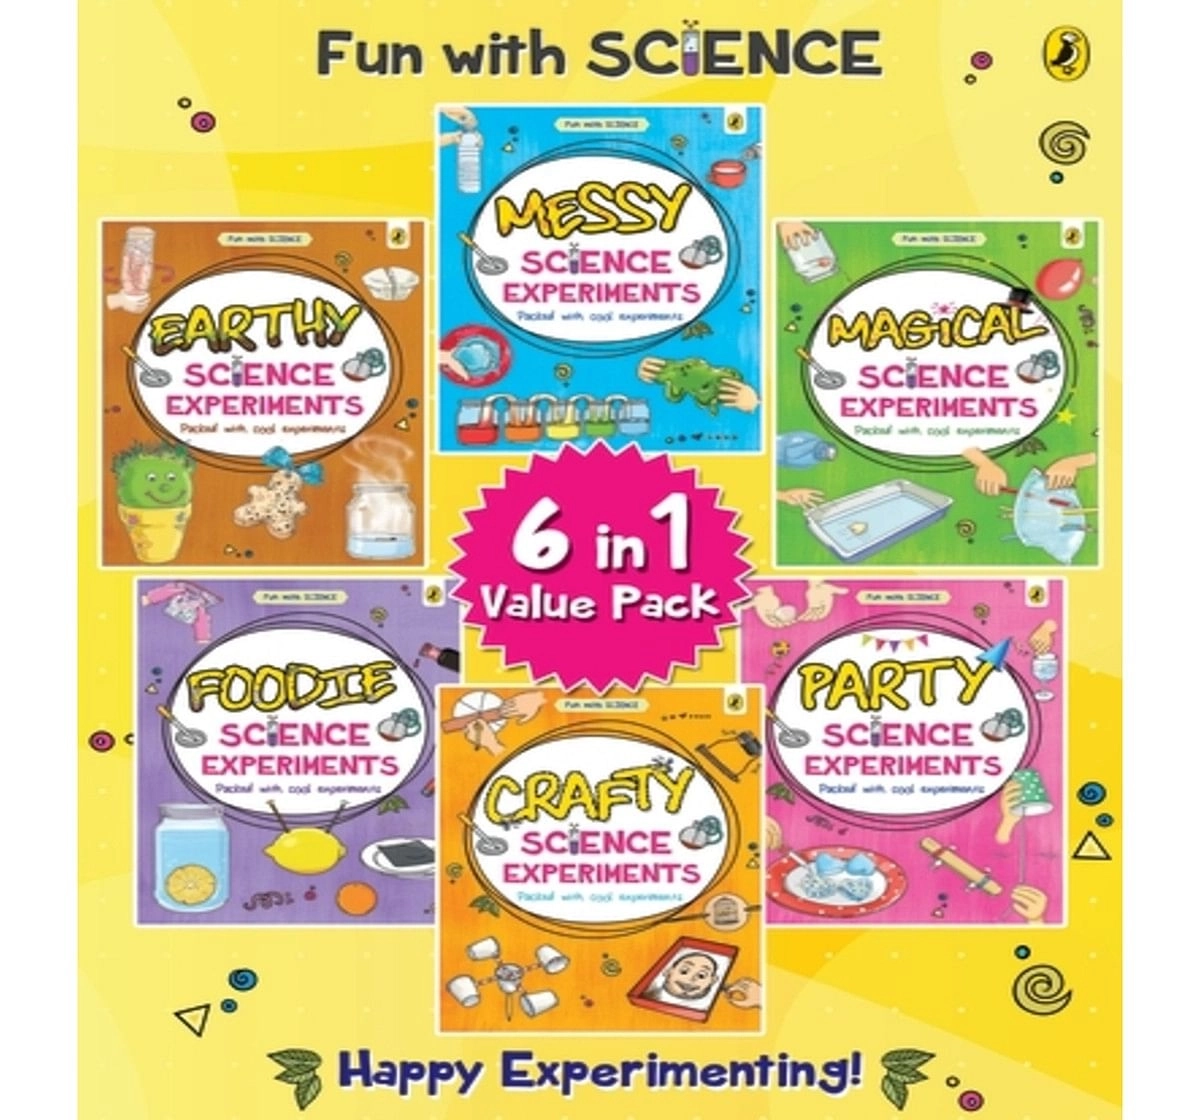 Fun with Science Box (Belly Band), 64 Pages Book by Mehta, Sonia, Paperback